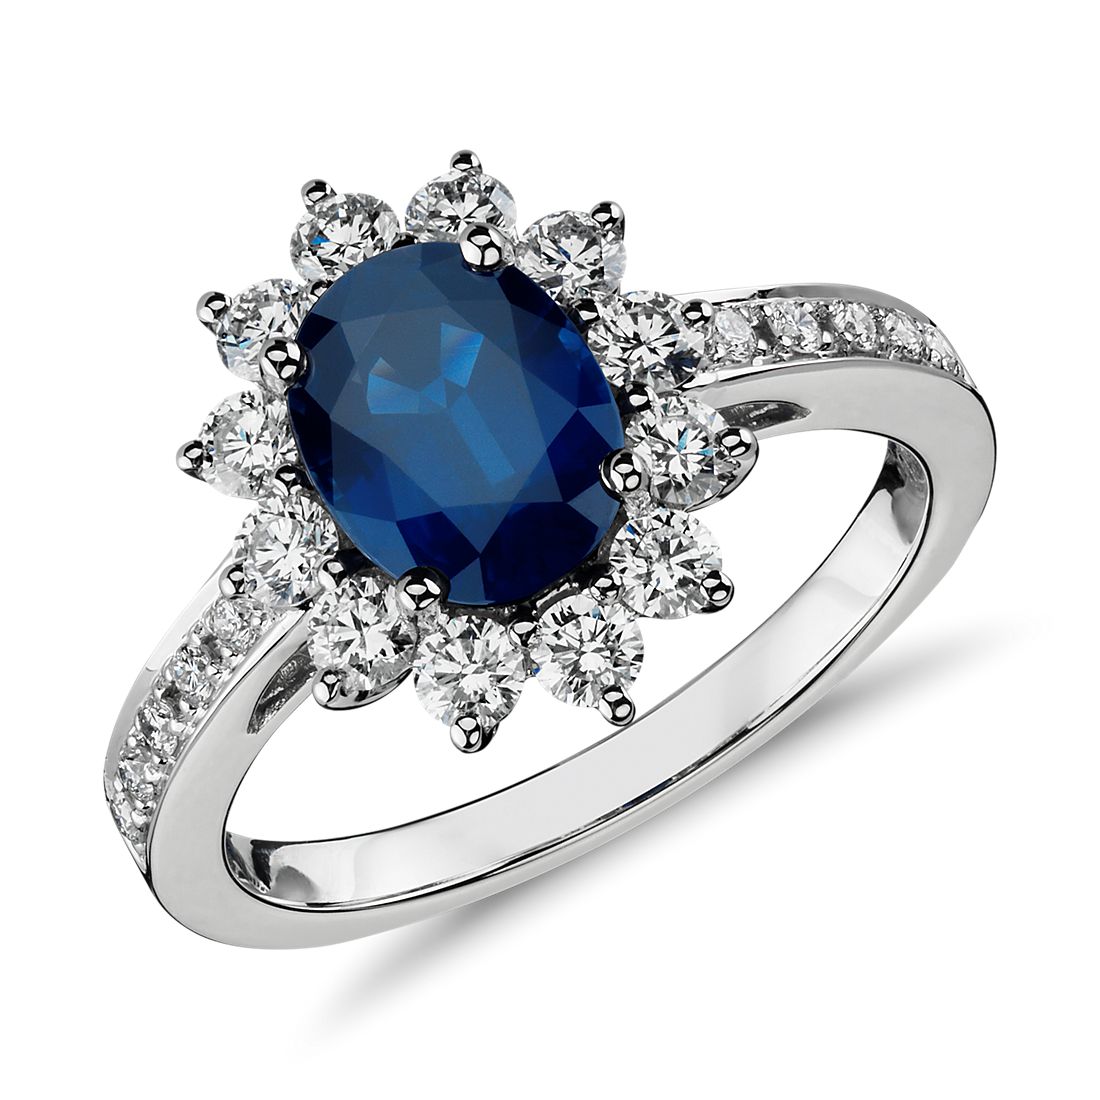 Oval Sapphire and Diamond Ring in 18k White Gold (8x6mm)